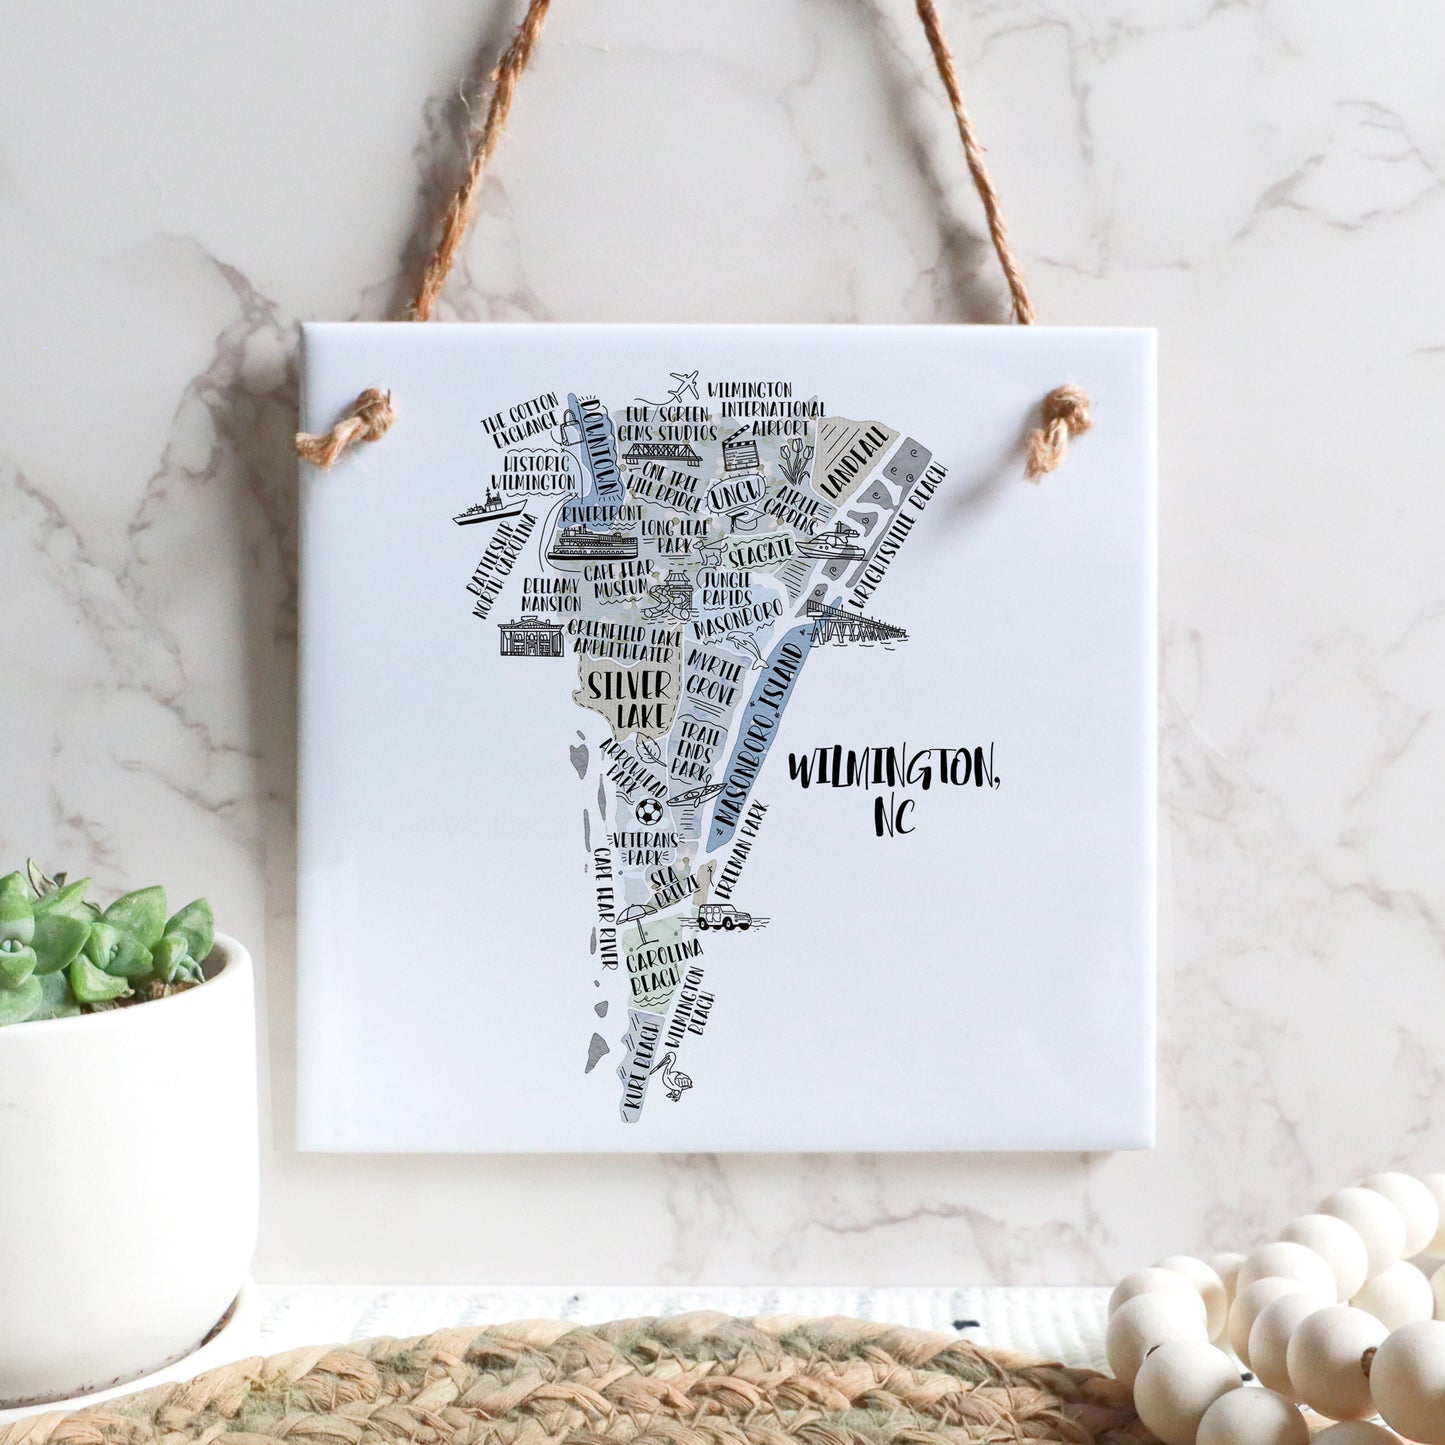 A hand-drawn tourist map of Wilmington North Carolina on a square tile sign hanging on a wall - in the color gray